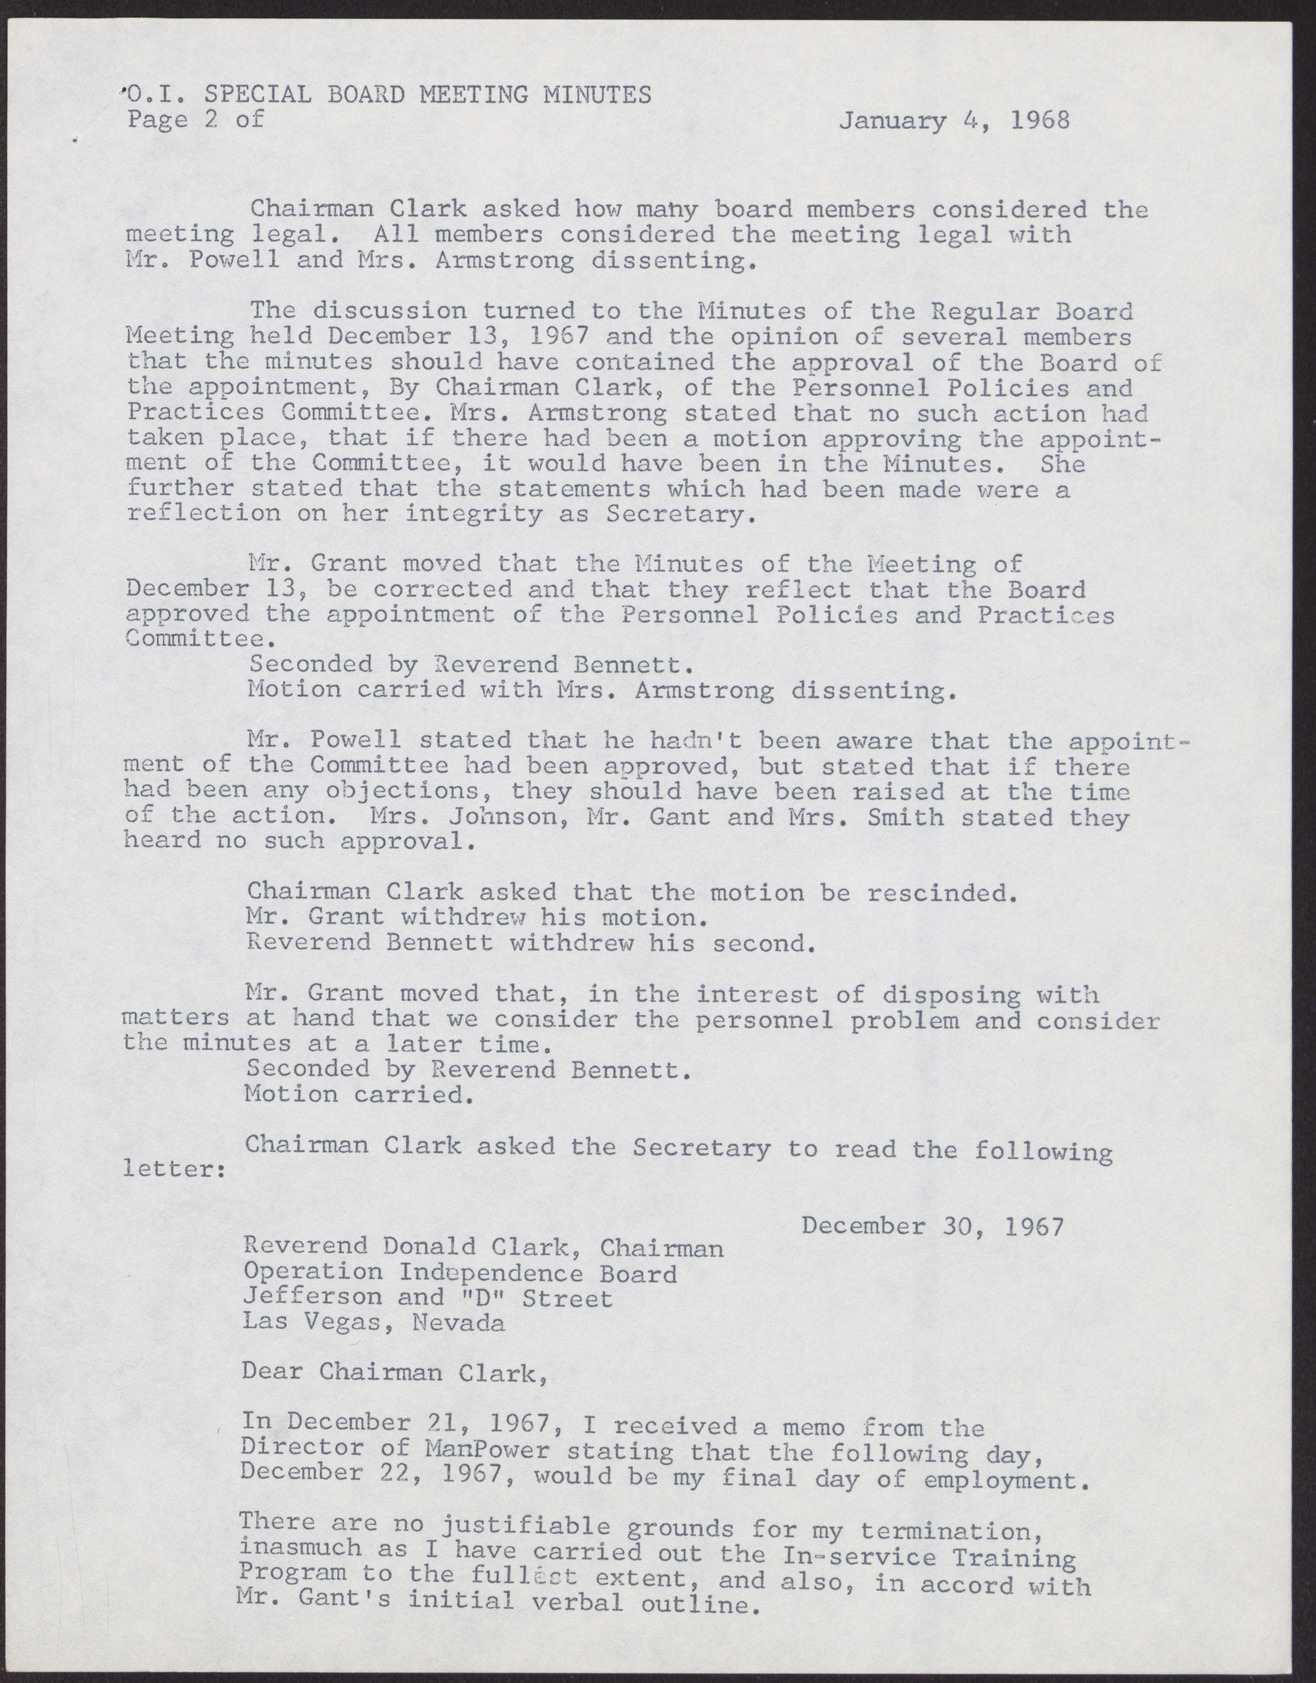 Minutes of Special Meeting of Operation Independence Board (5 pages), January 4, 1968, page 2